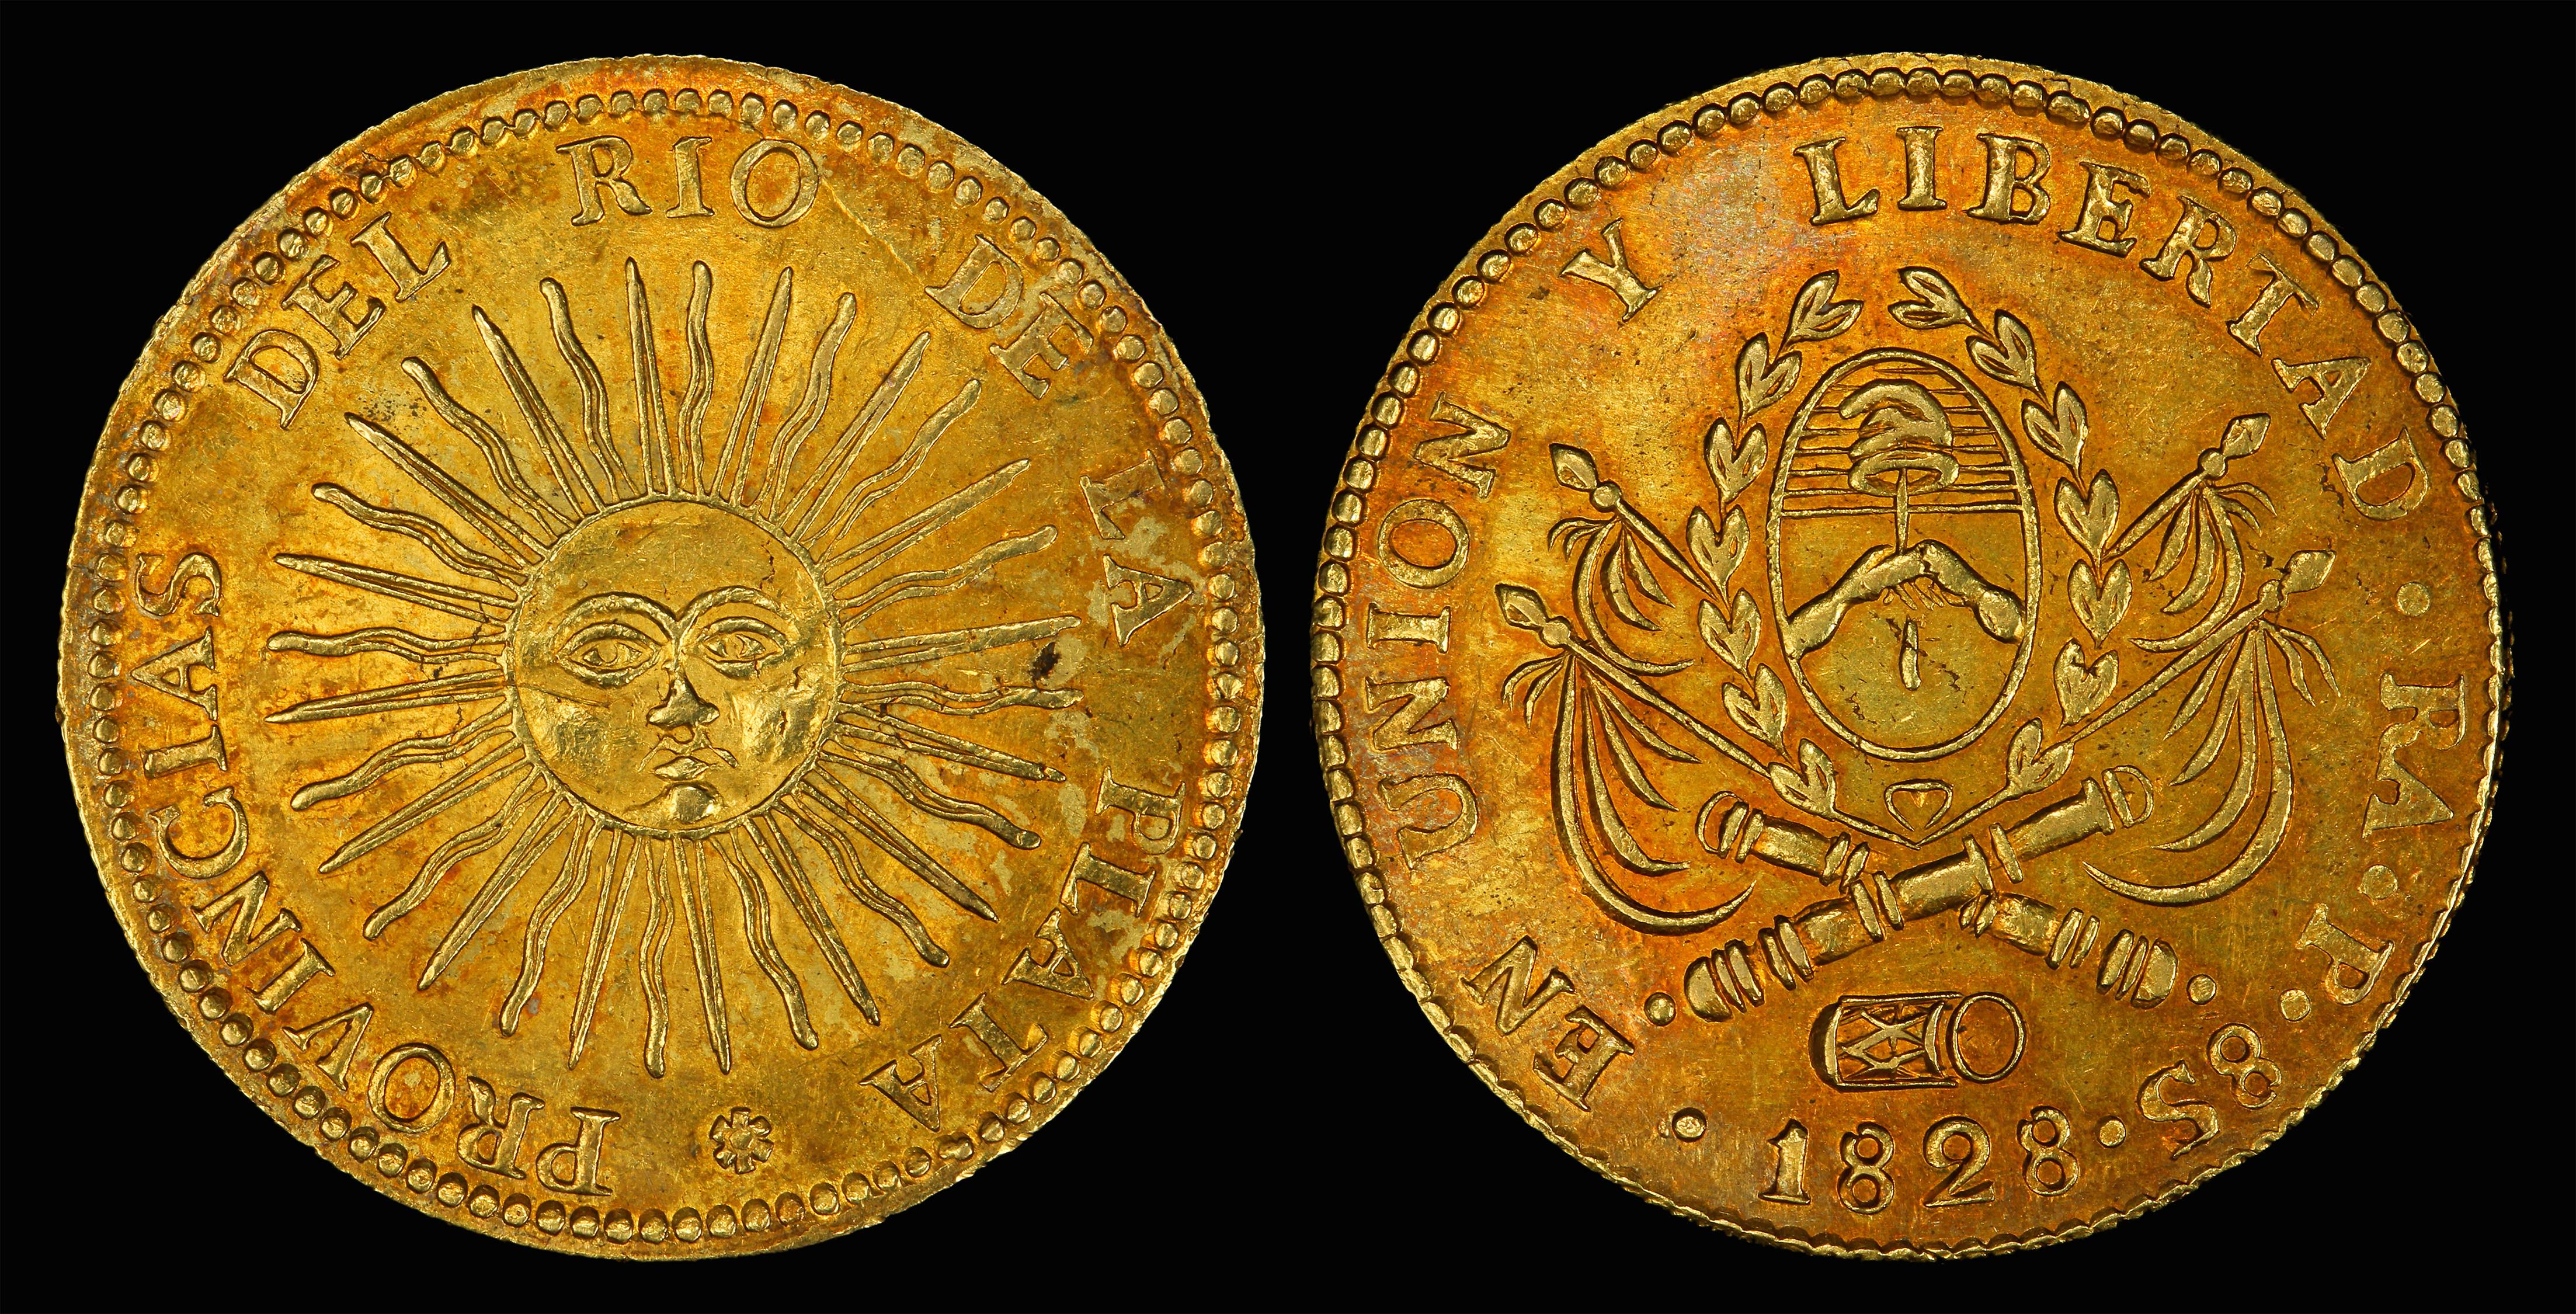 United Provinces of the River Plate (coin), National Numismatic Collection (image) (1828)